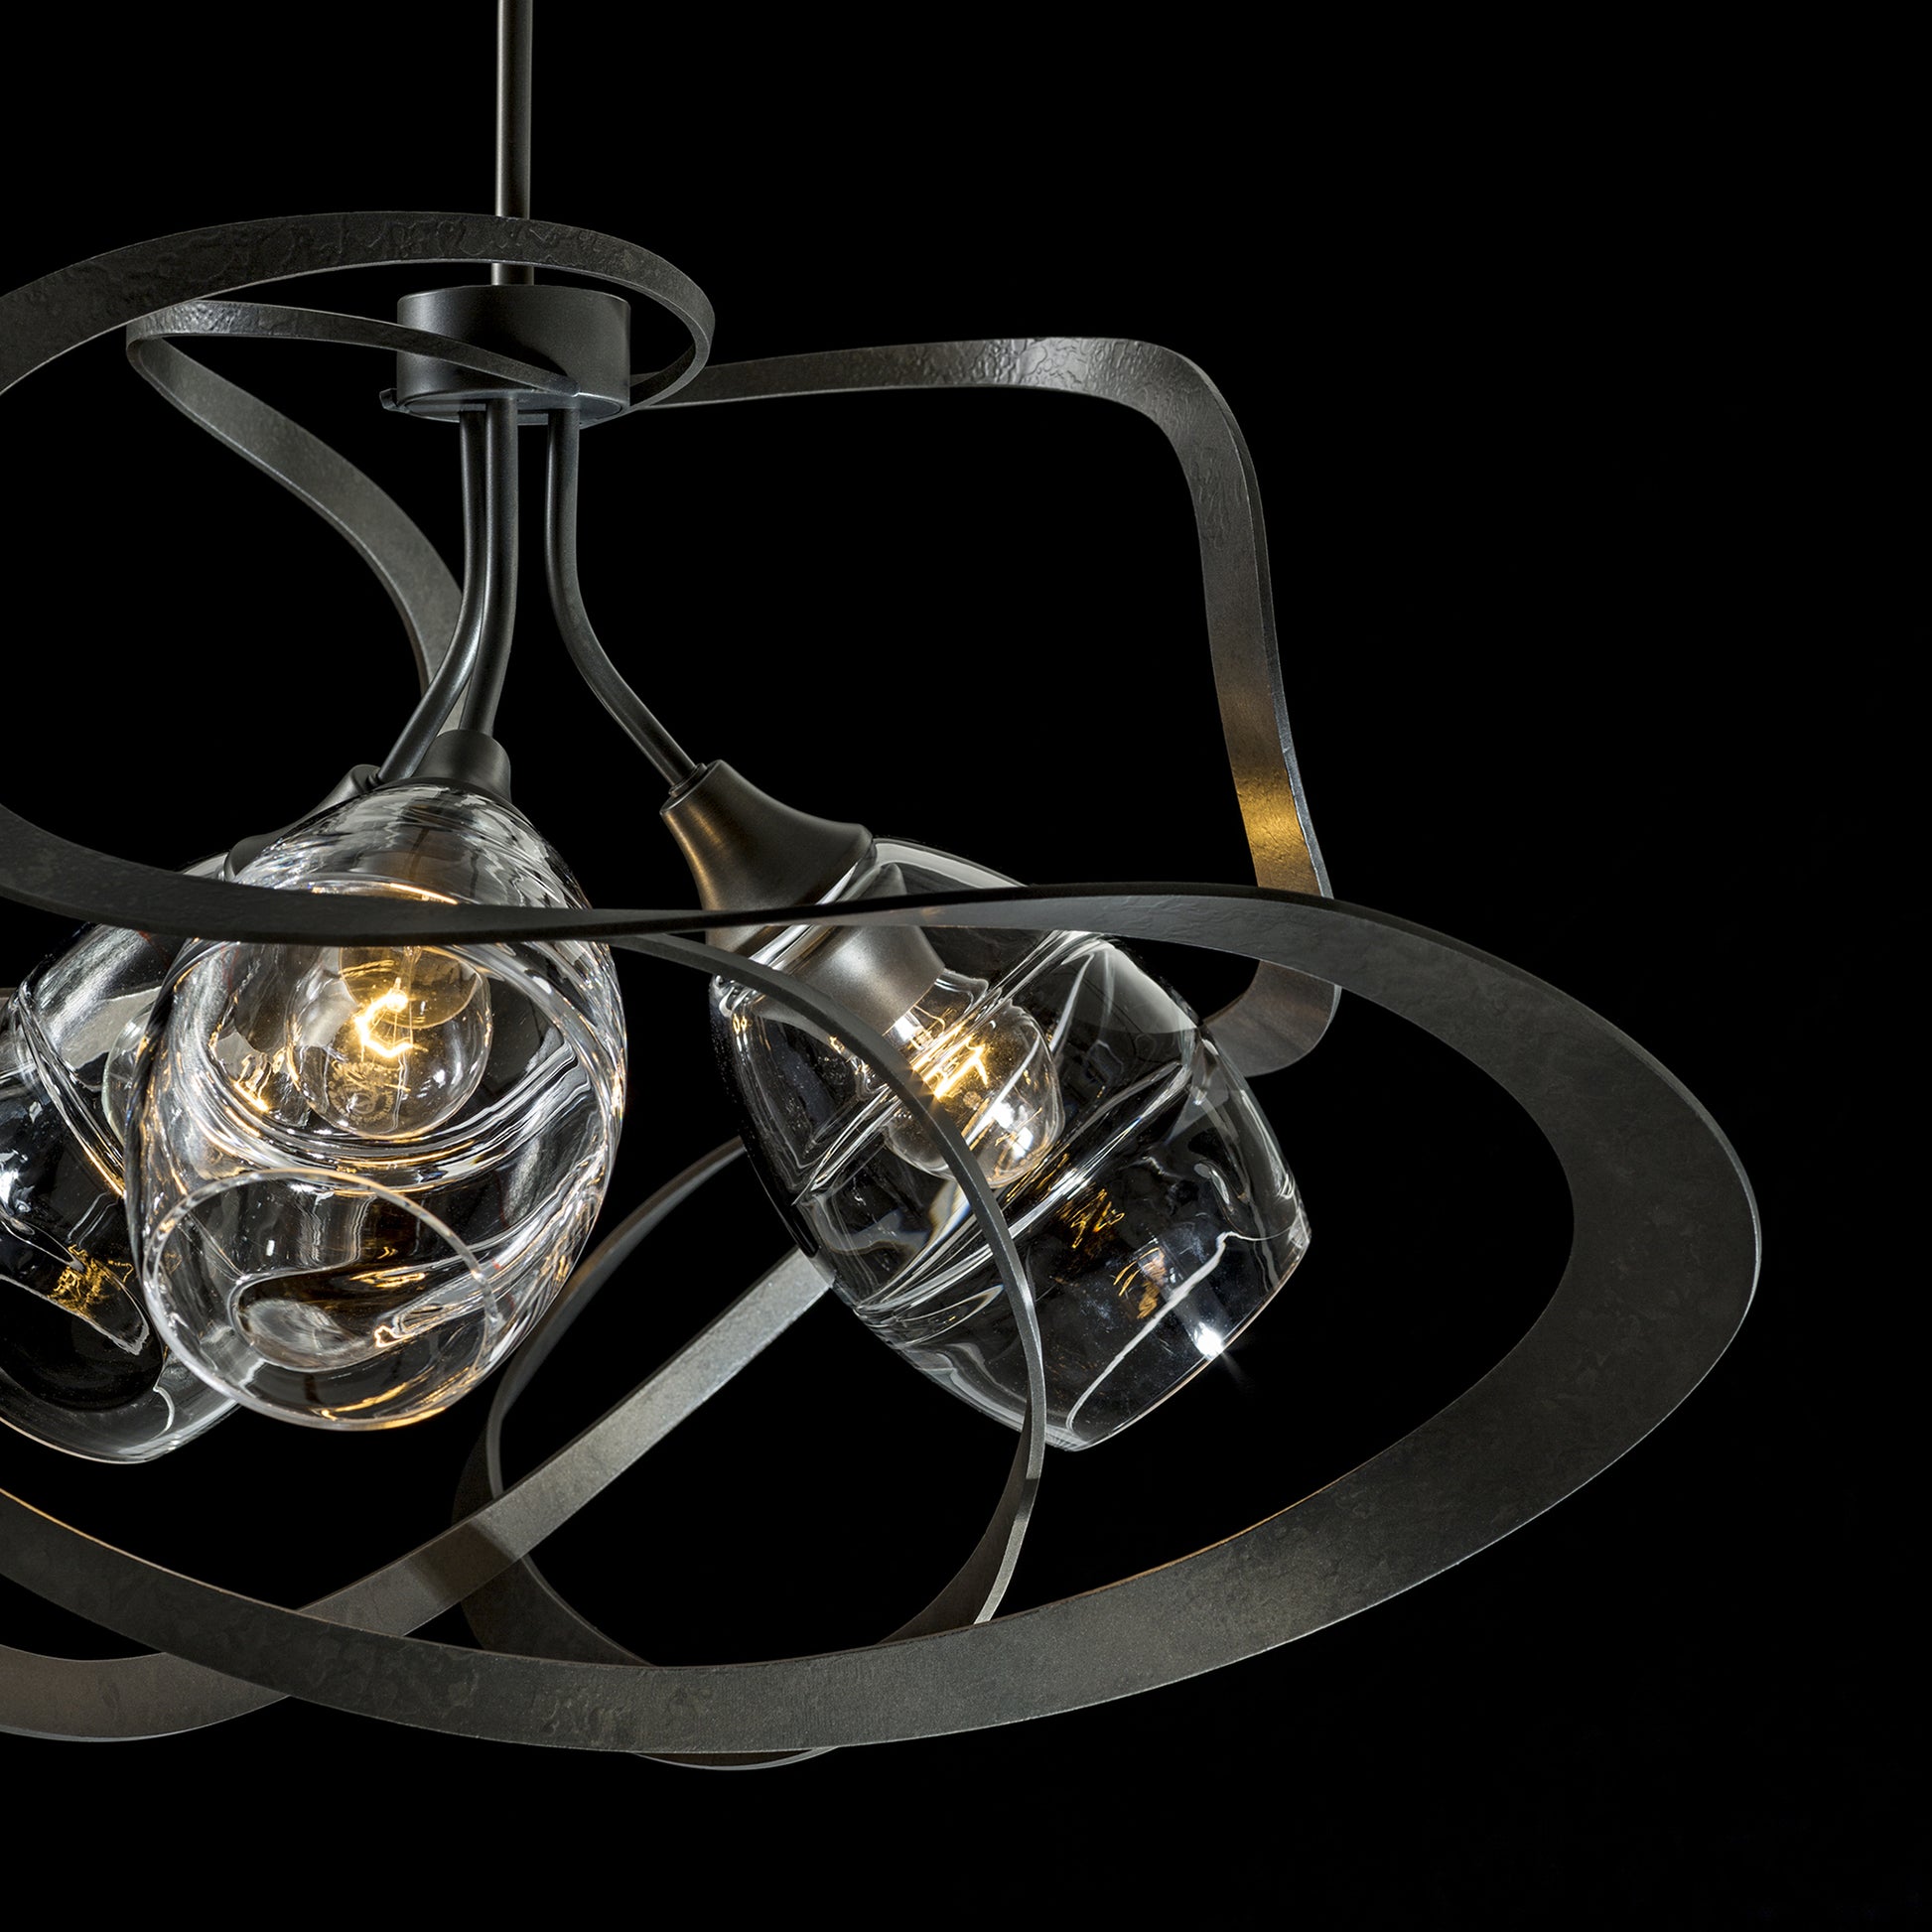 A handcrafted Hubbardton Forge Nest Pendant with three glass shades and a metal frame.